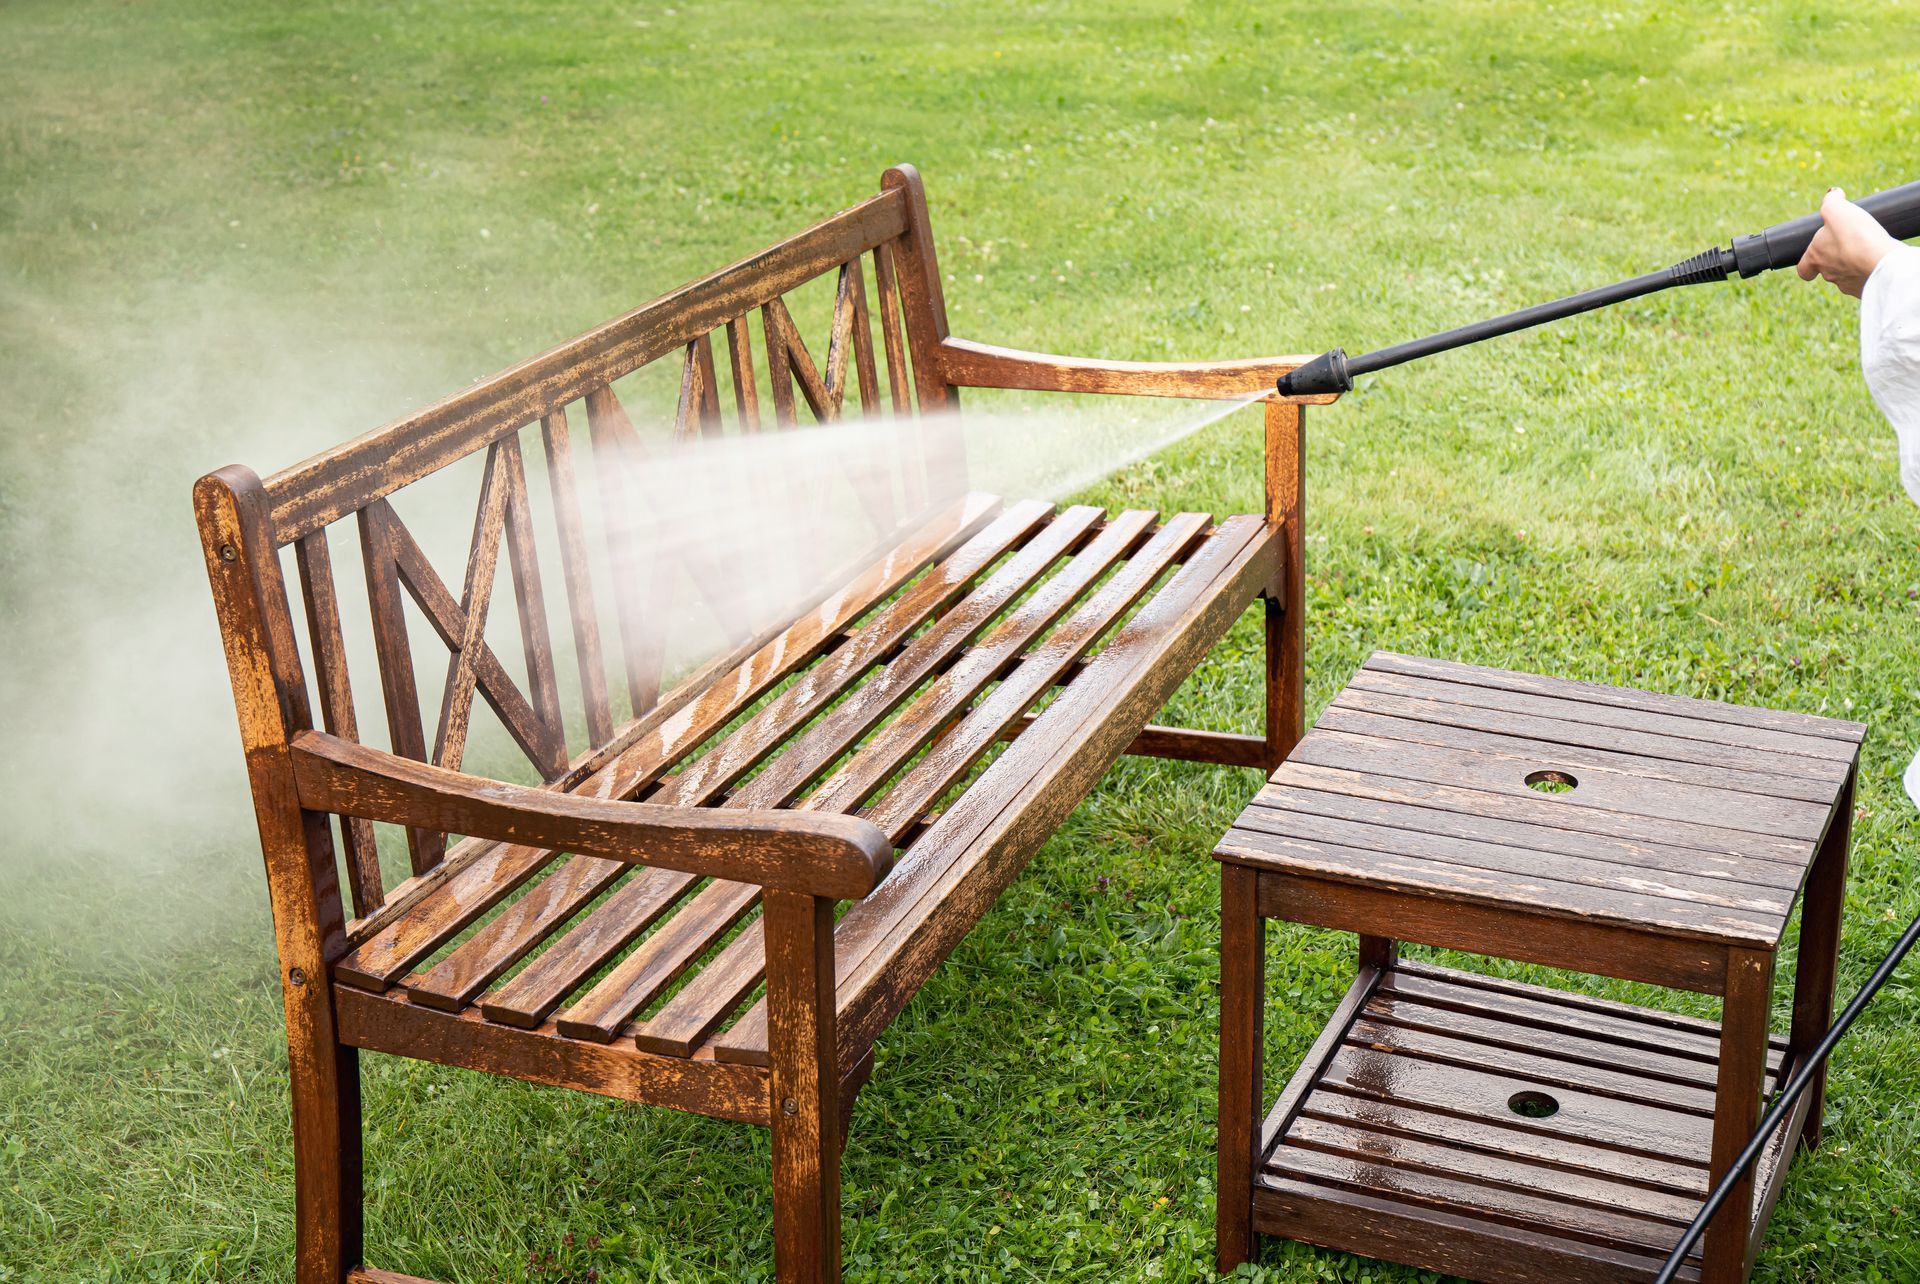 Garden patio furniture cleaning service in Hull, pressure washing garden set outdoors.